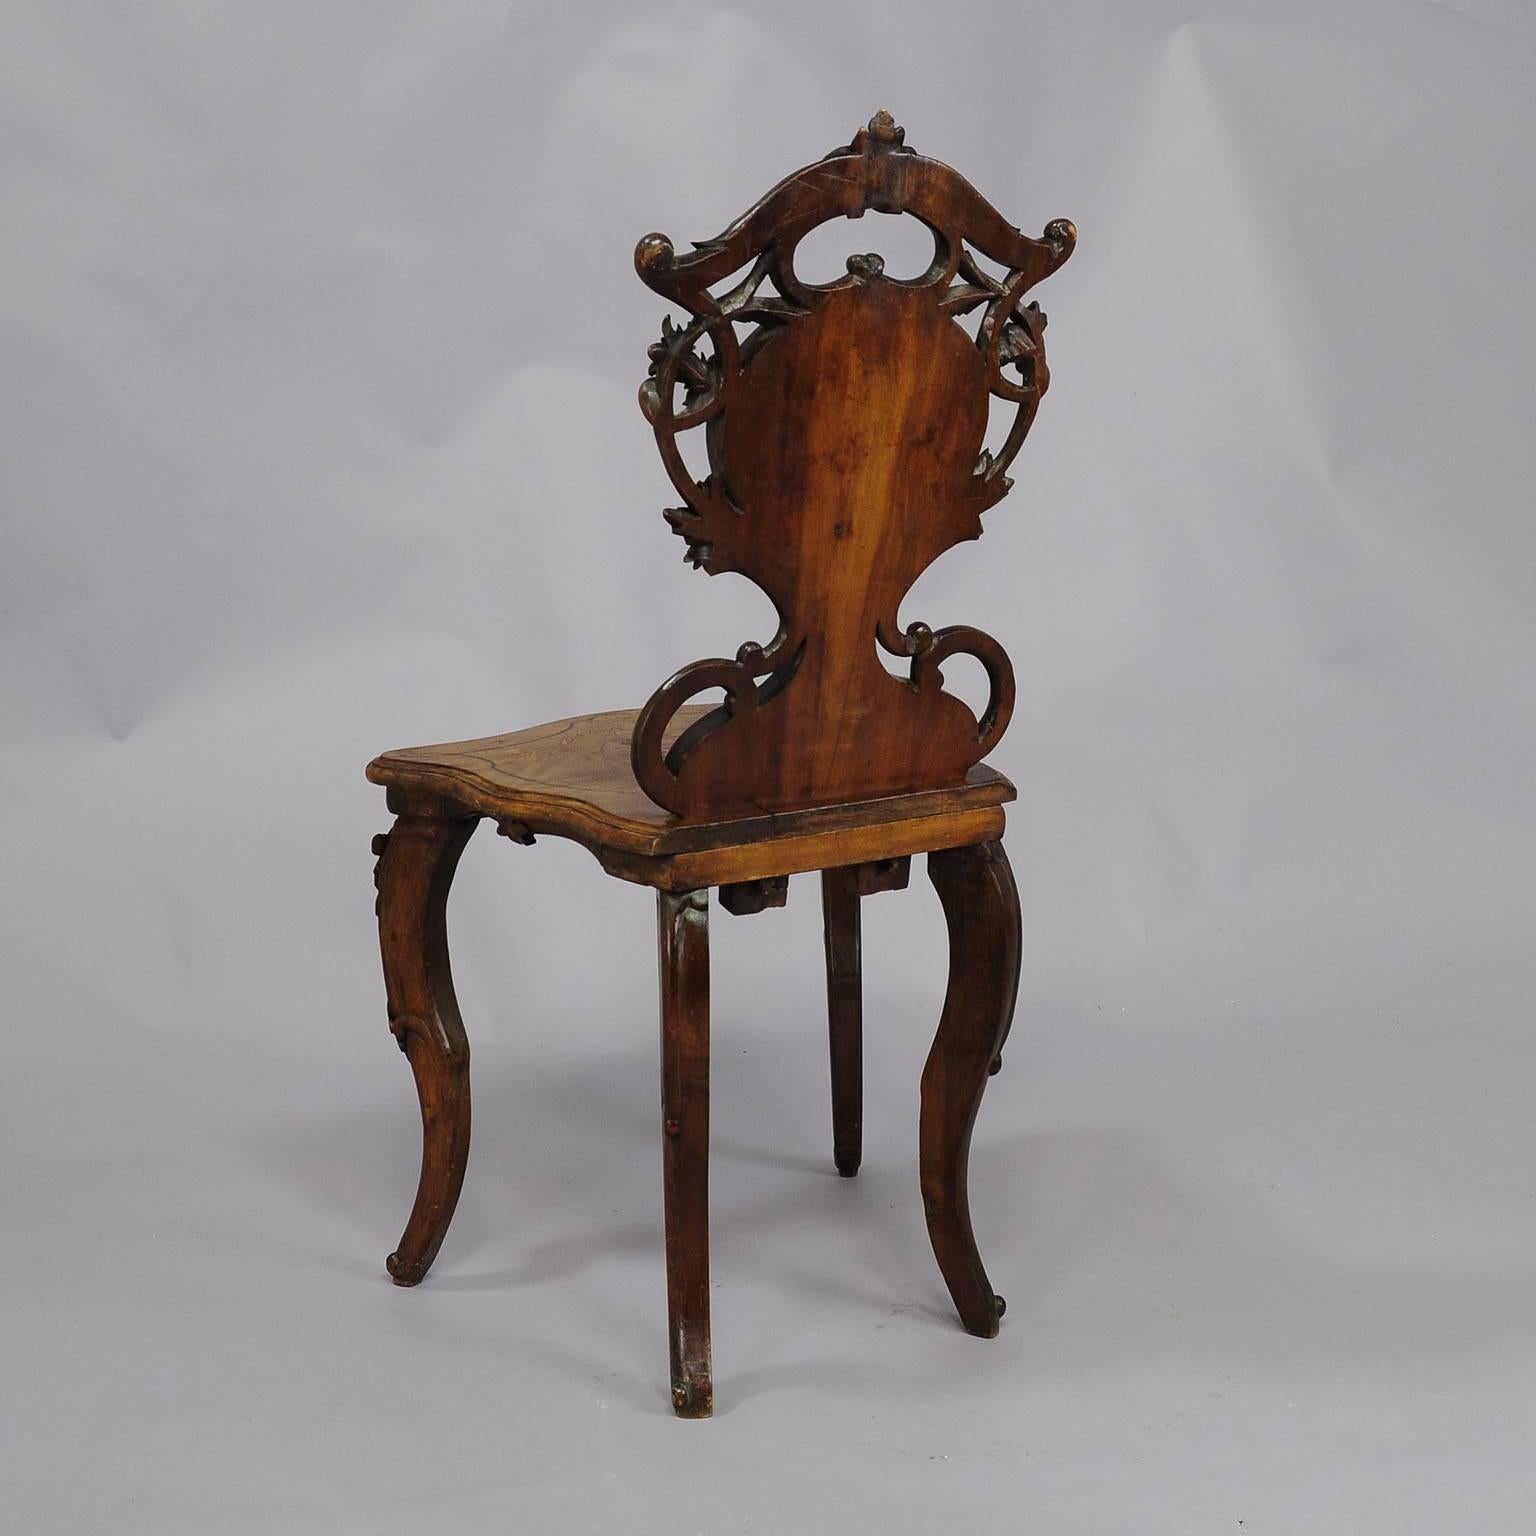 A beautifully carved and inlaid chair from Brienz, Switzerland.